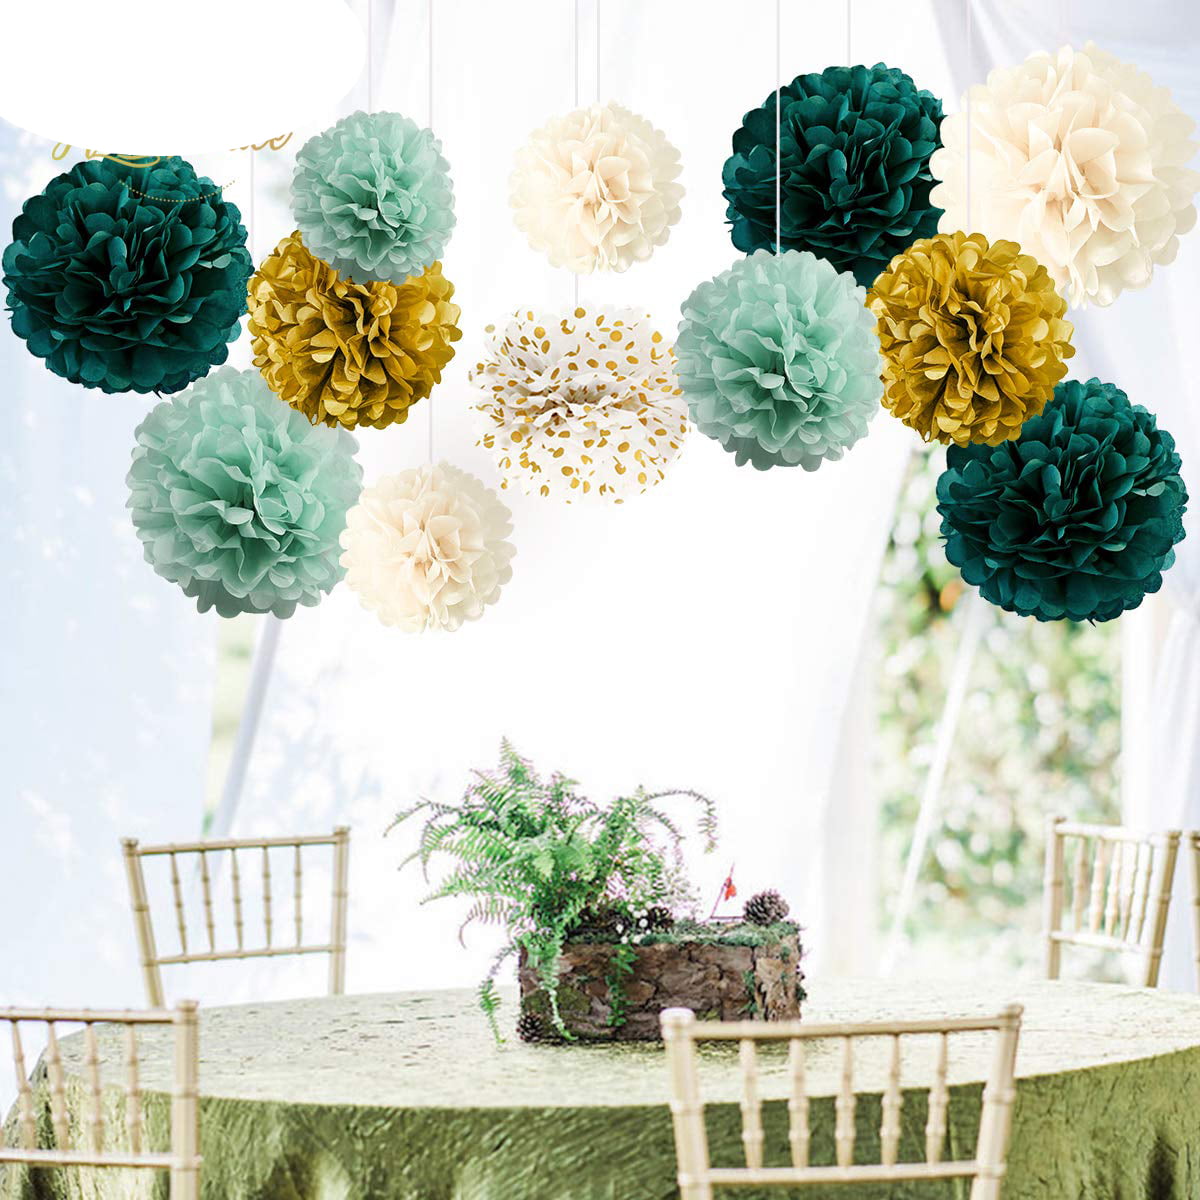 The Wedding March: 30 Minute Tissue Paper Pom Poms - Best Bib and